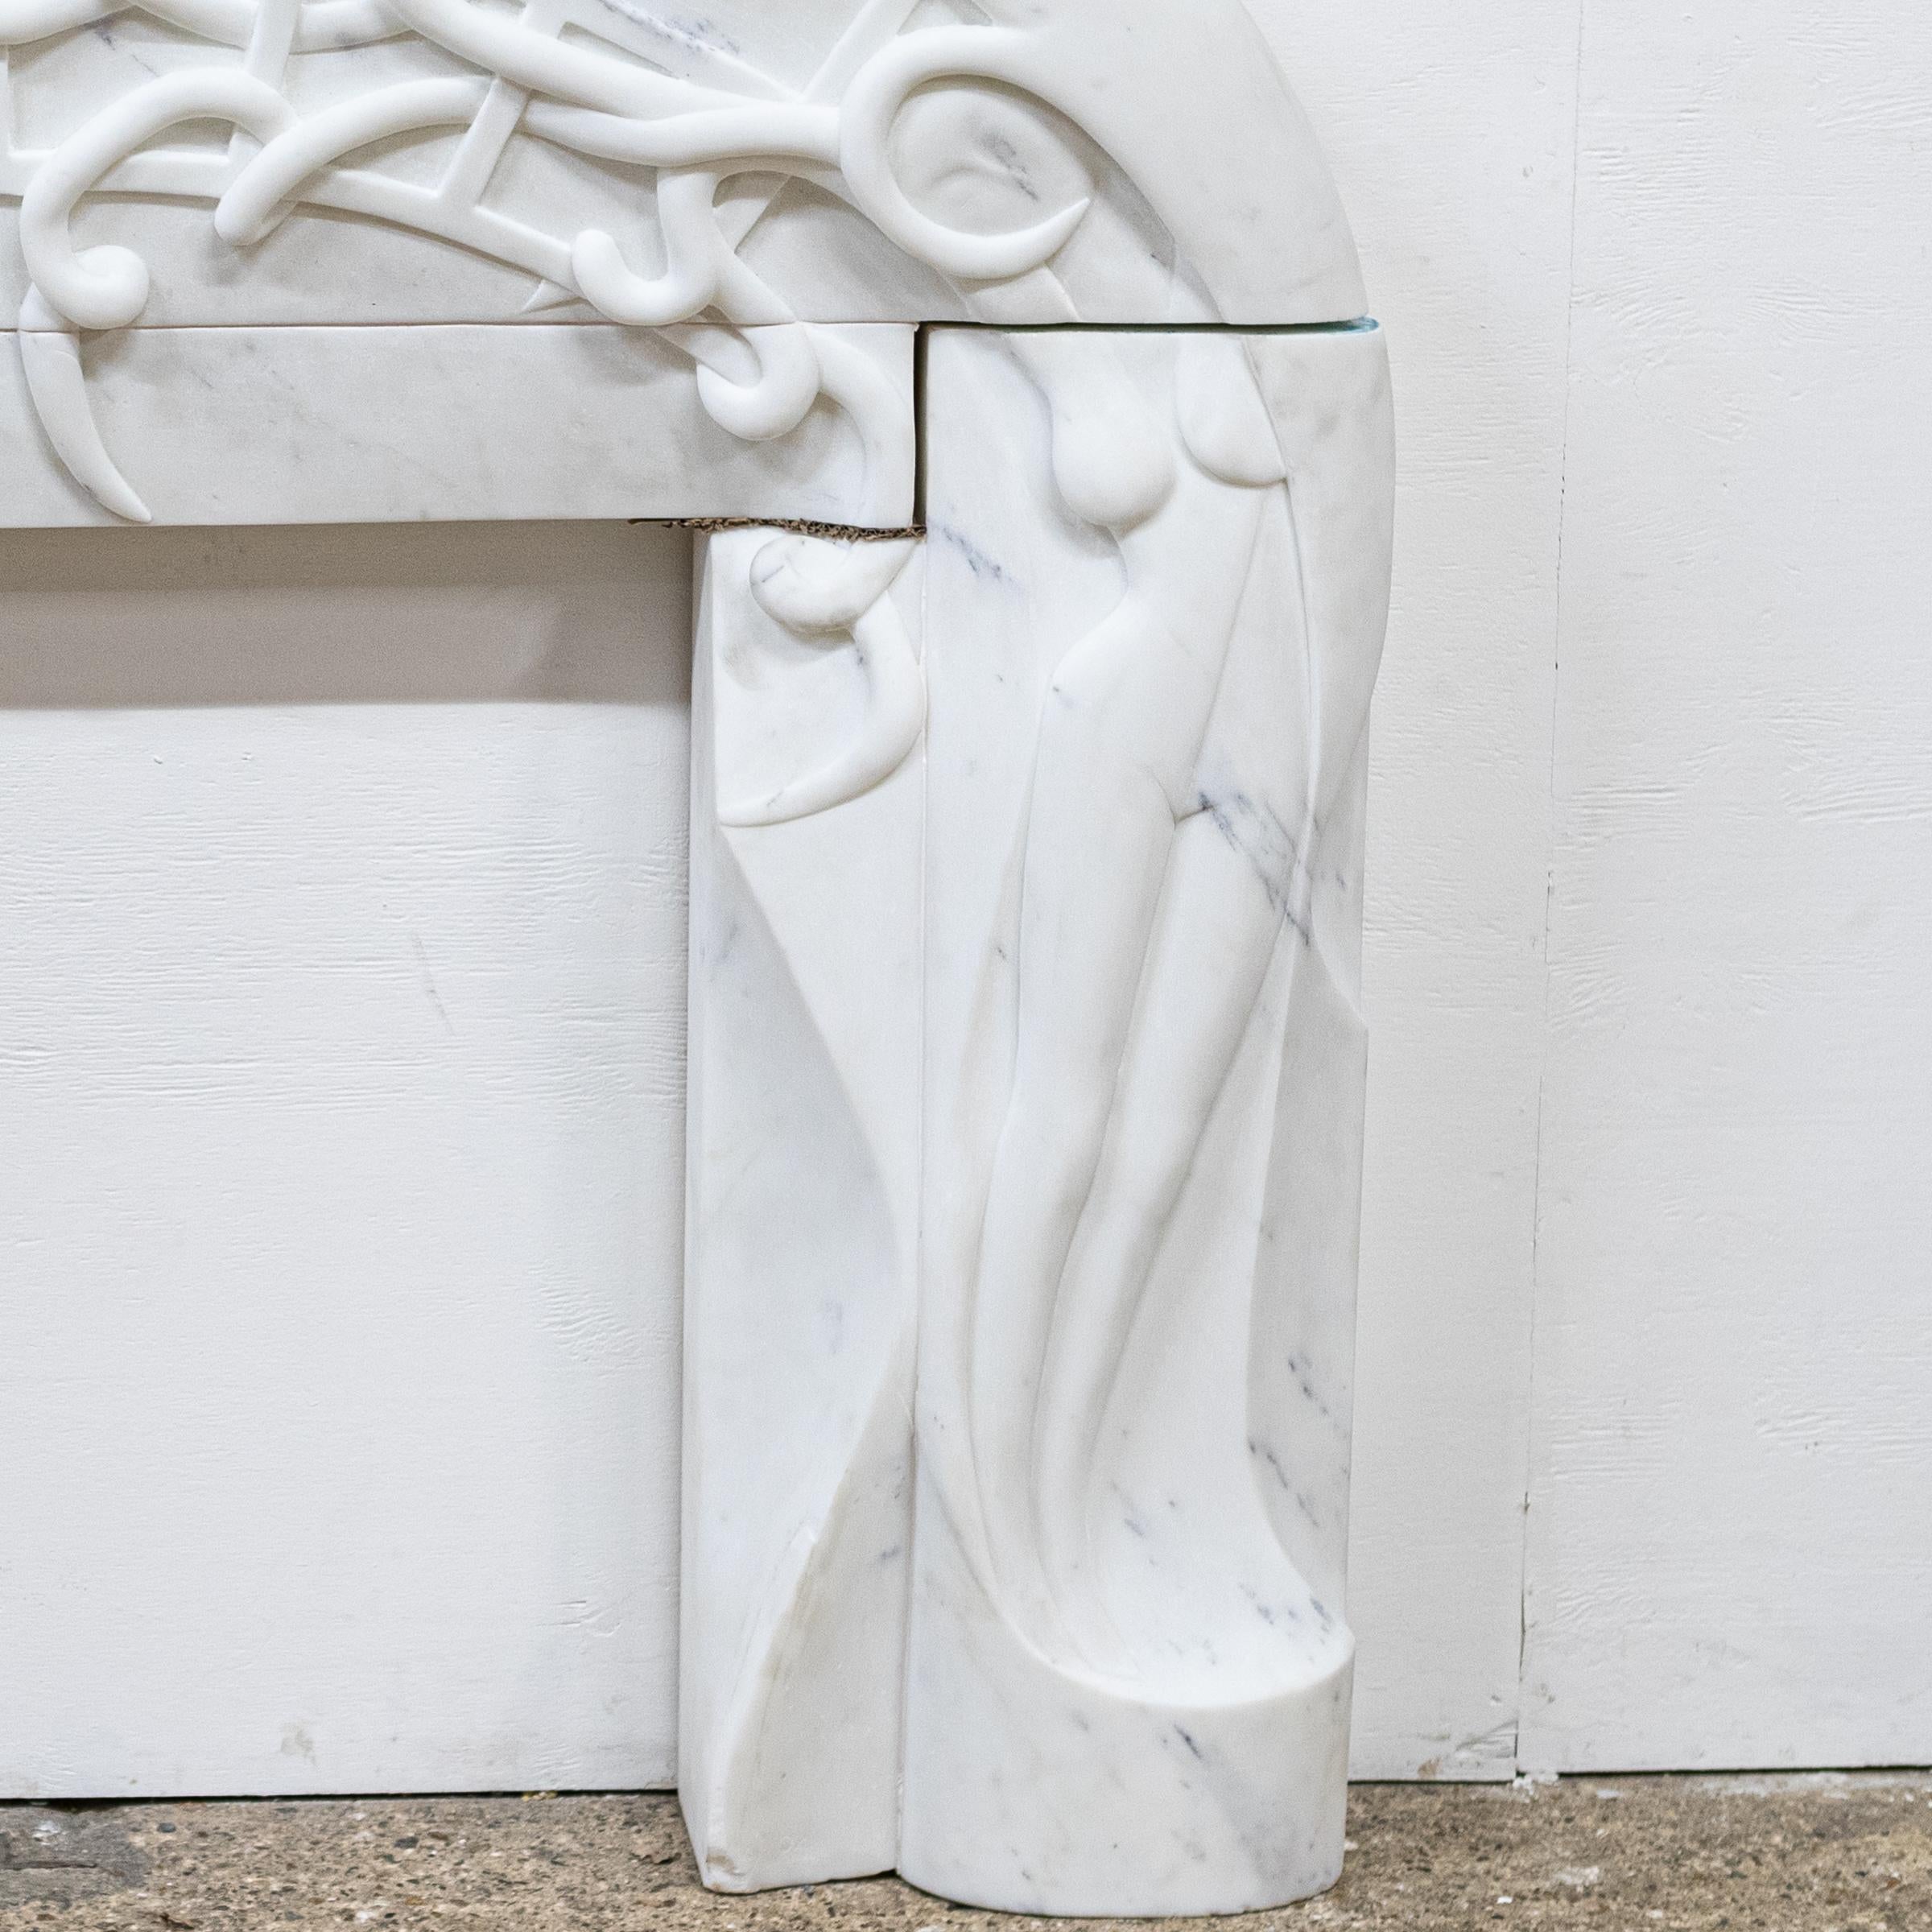 An impressive and monumental piece, this large reclaimed contemporary fire surround is a rare find.

The arched form is adorned with organic and finely carved feminine depictions.

Comprised of 3 substantial and solid blocks of statuary marble, the